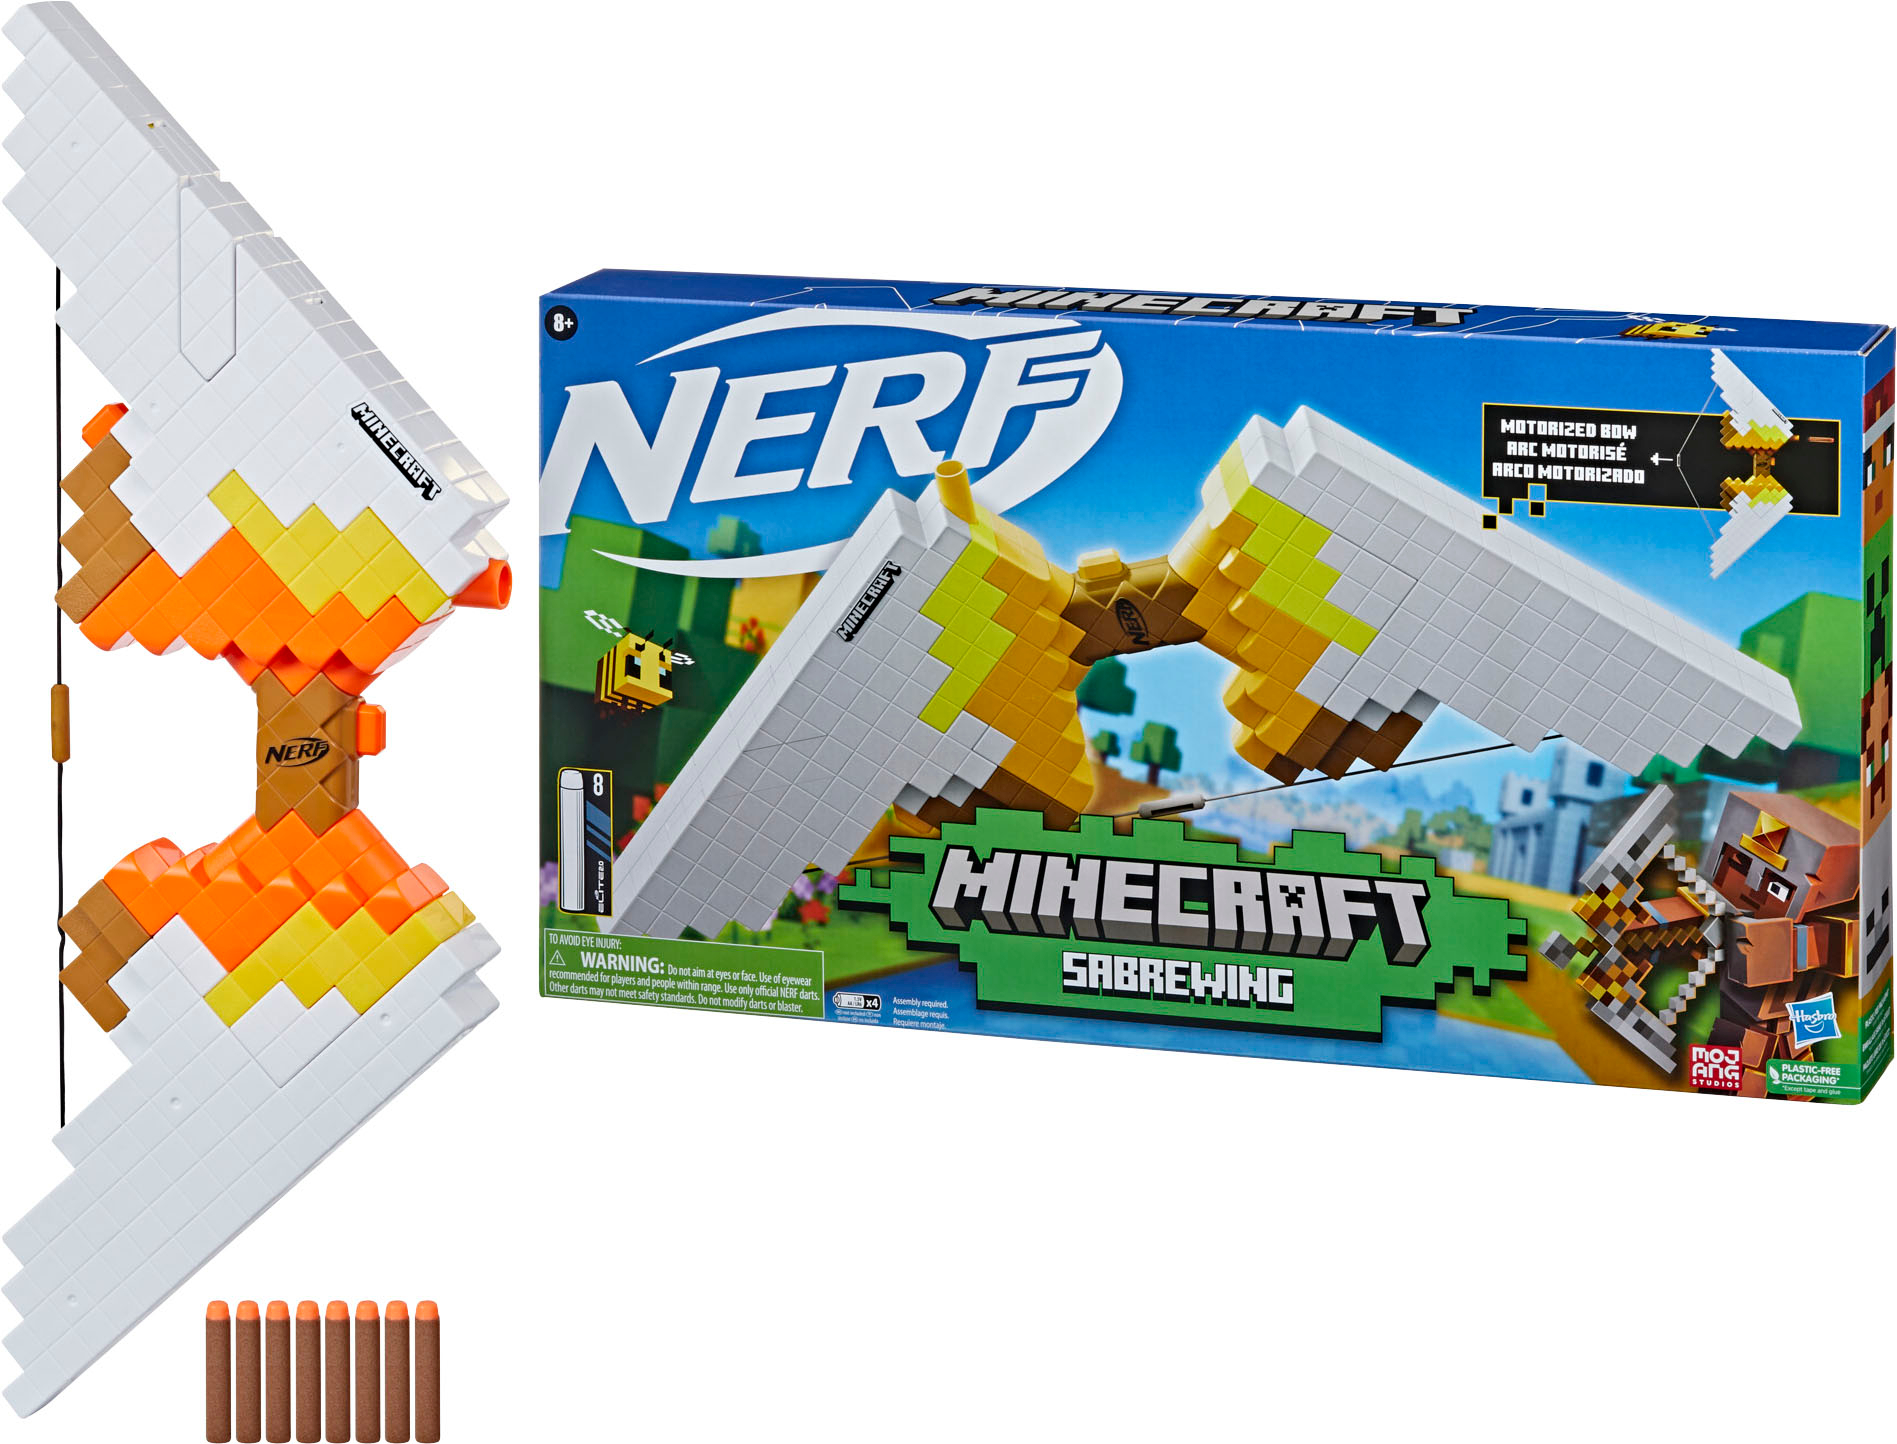 NERF Reveals Minecraft Sabrewing Motorized Bow Based on Minecraft